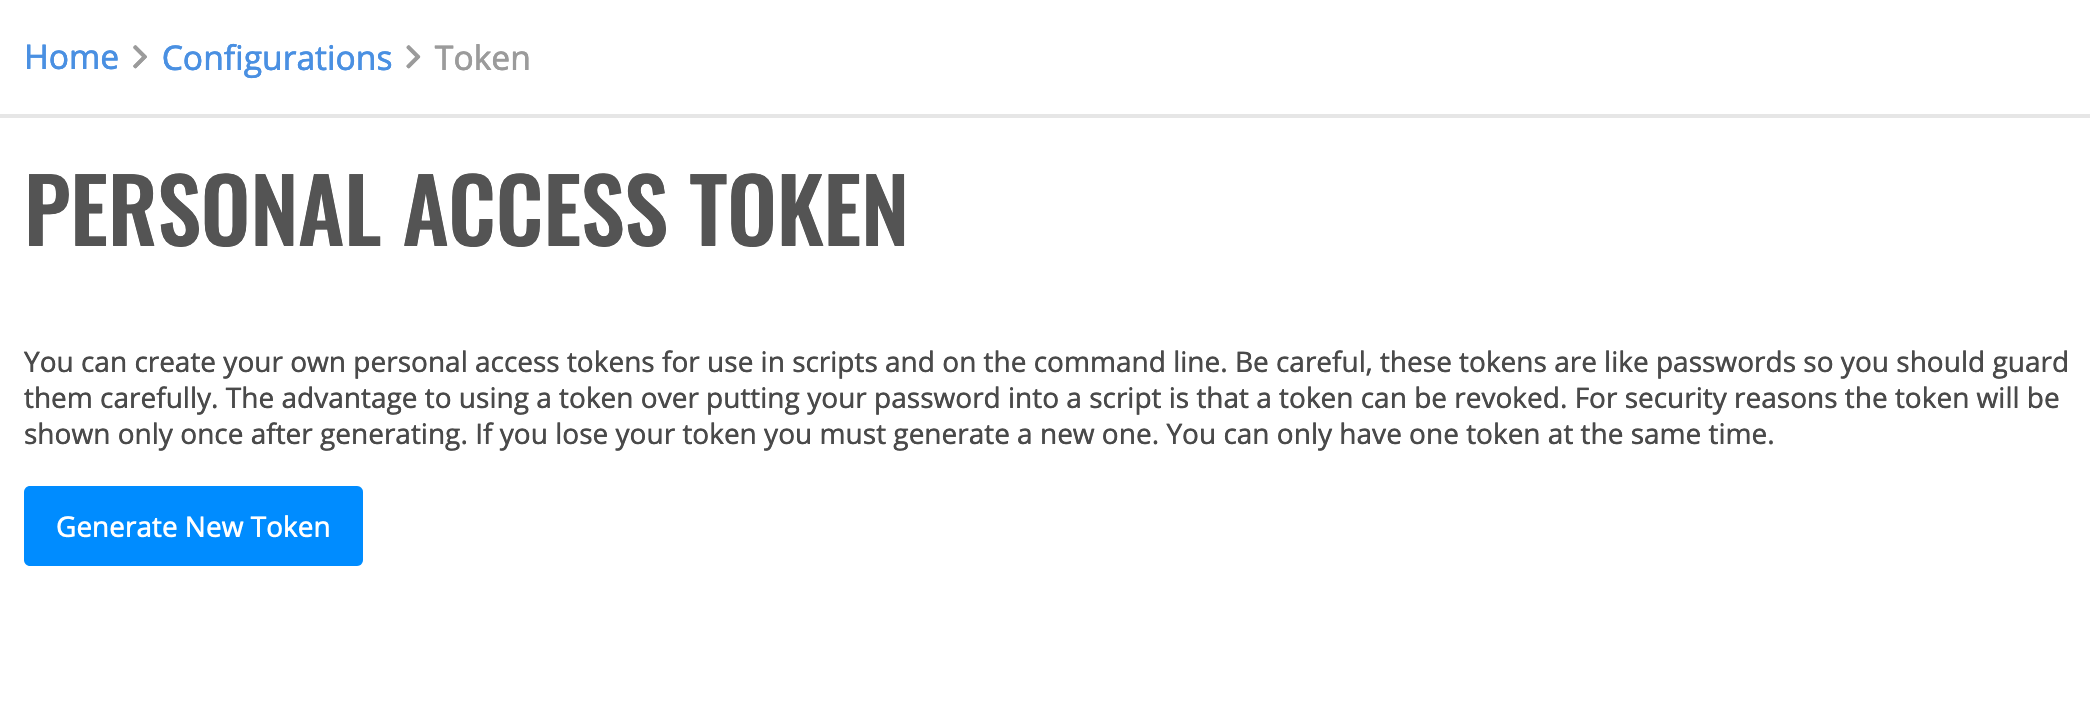 Personal access token page